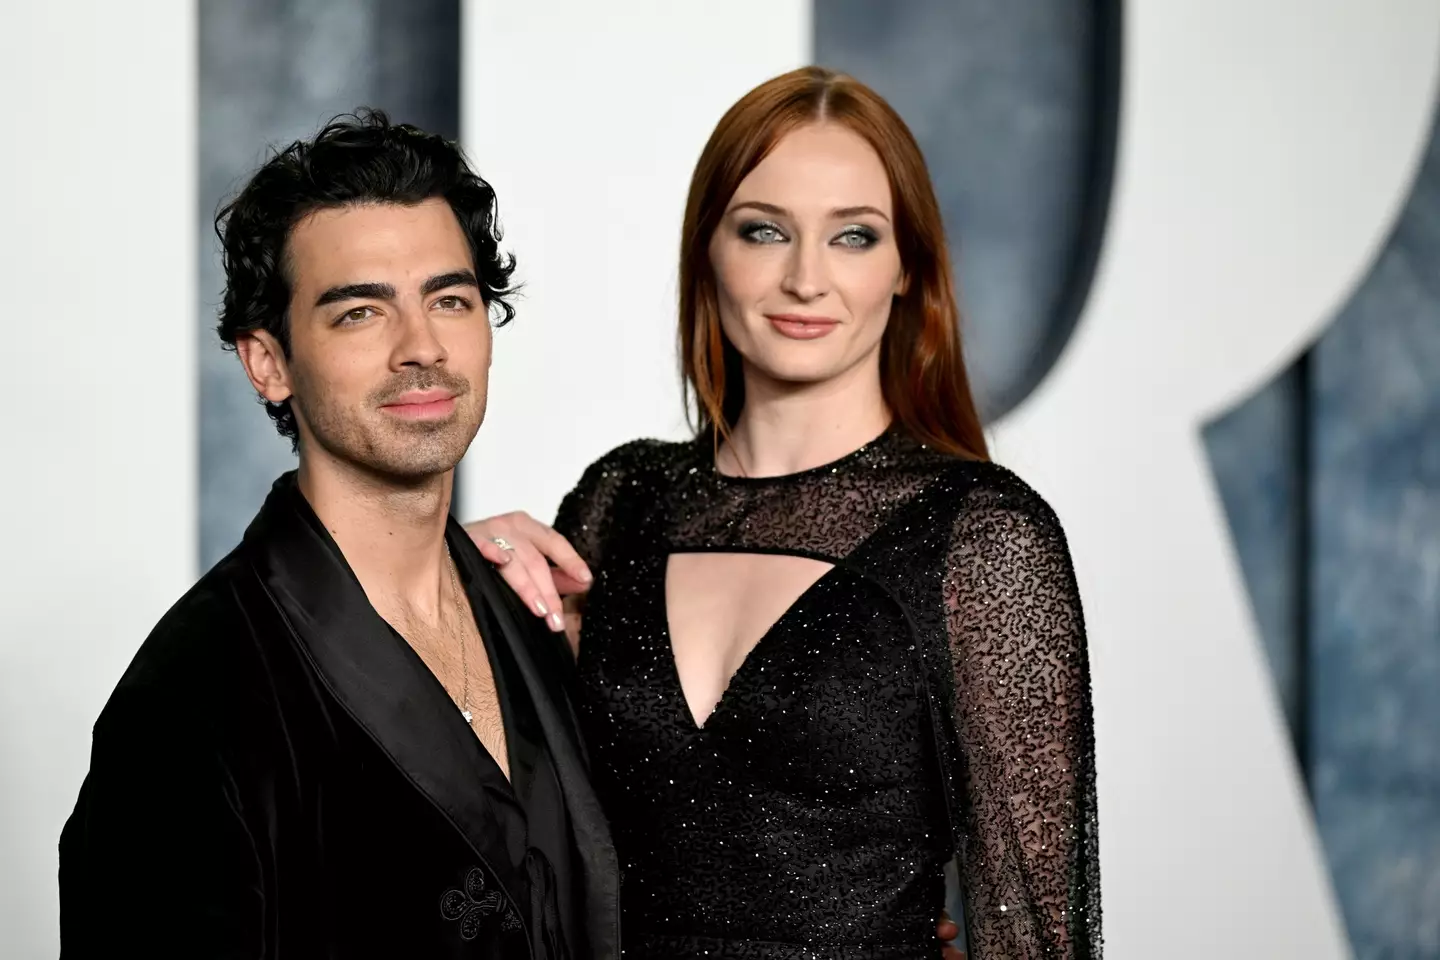 Sophie Turner and Joe Jonas are divorcing after 4 years.